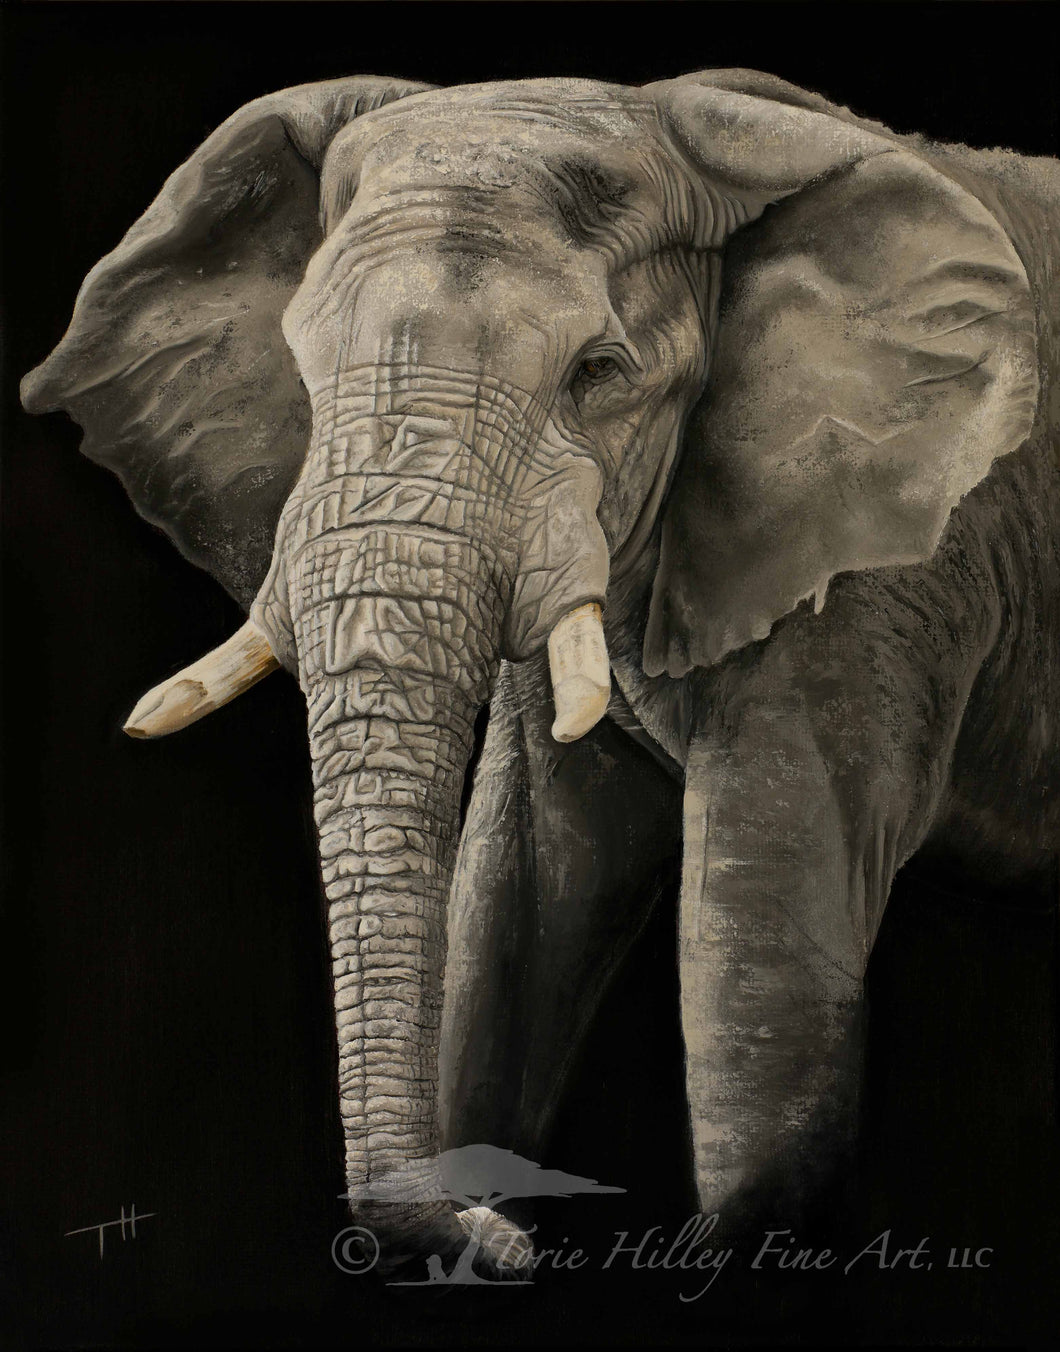 Dreaming of Elephants - Limited Edition Reproduction Prints